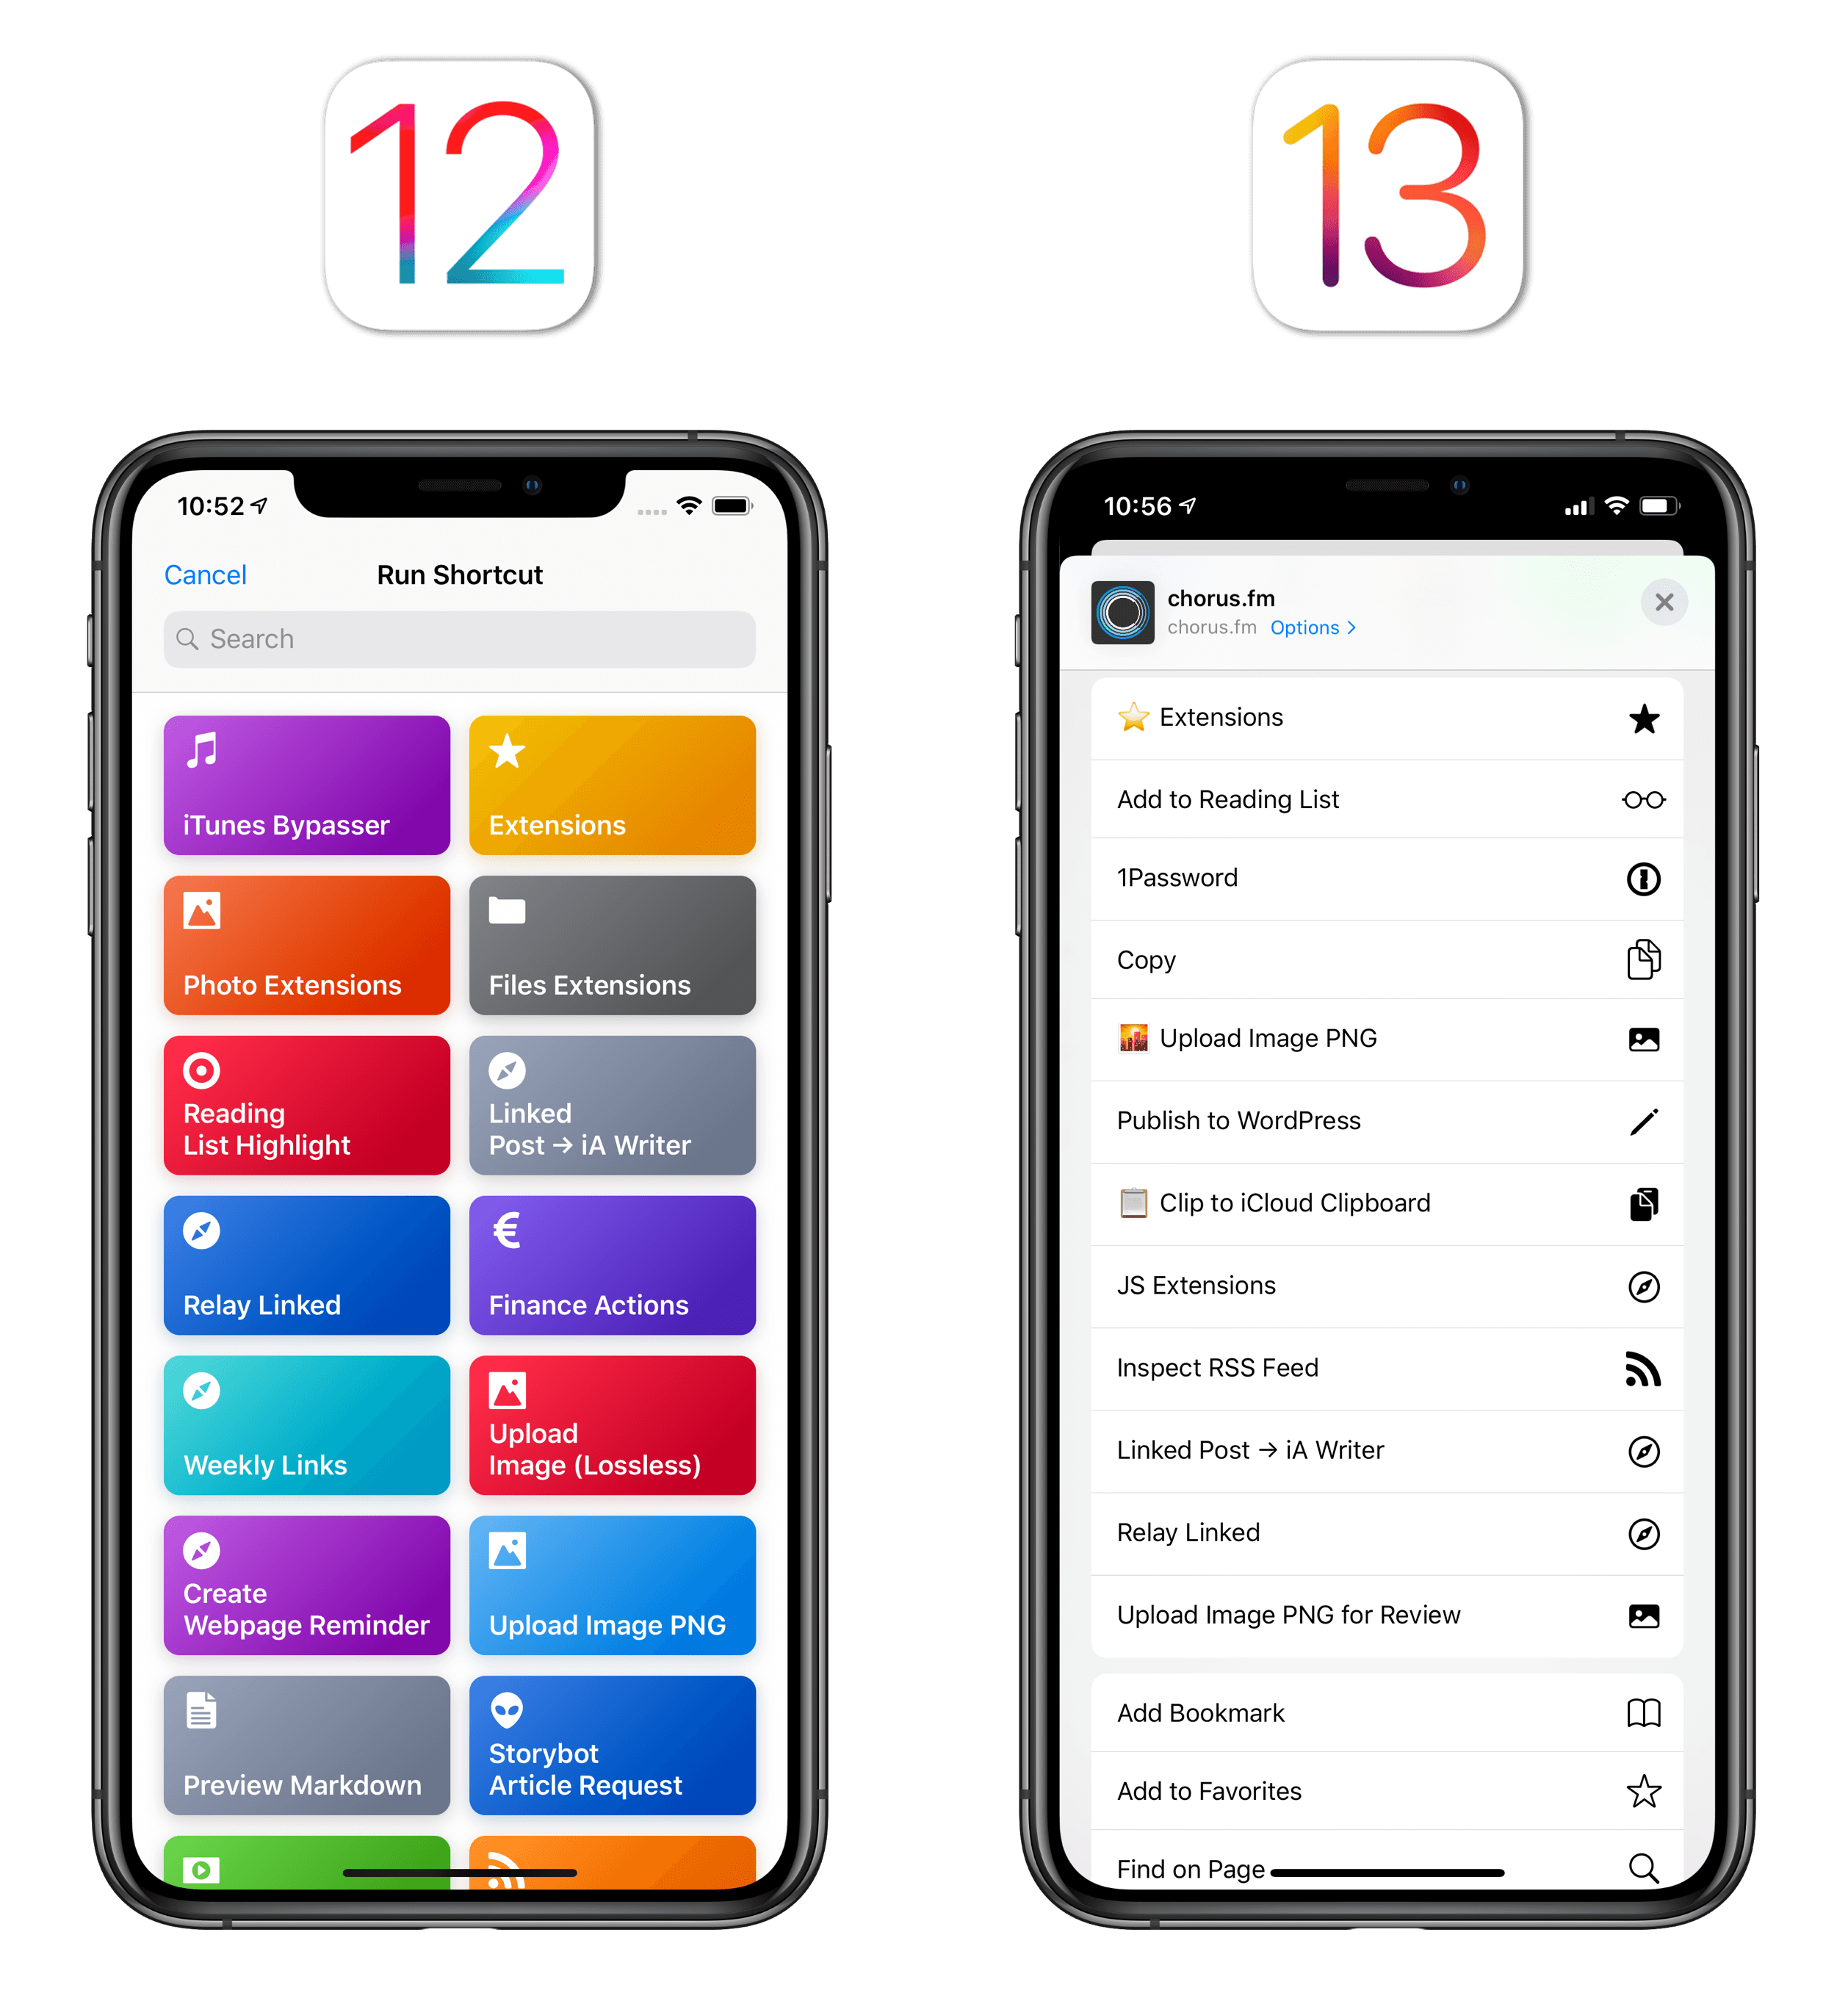 In iOS 12, you had to open a separate extension to view your shortcuts. In iOS 13, your shortcuts are top-level items that can be intermixed with other actions.